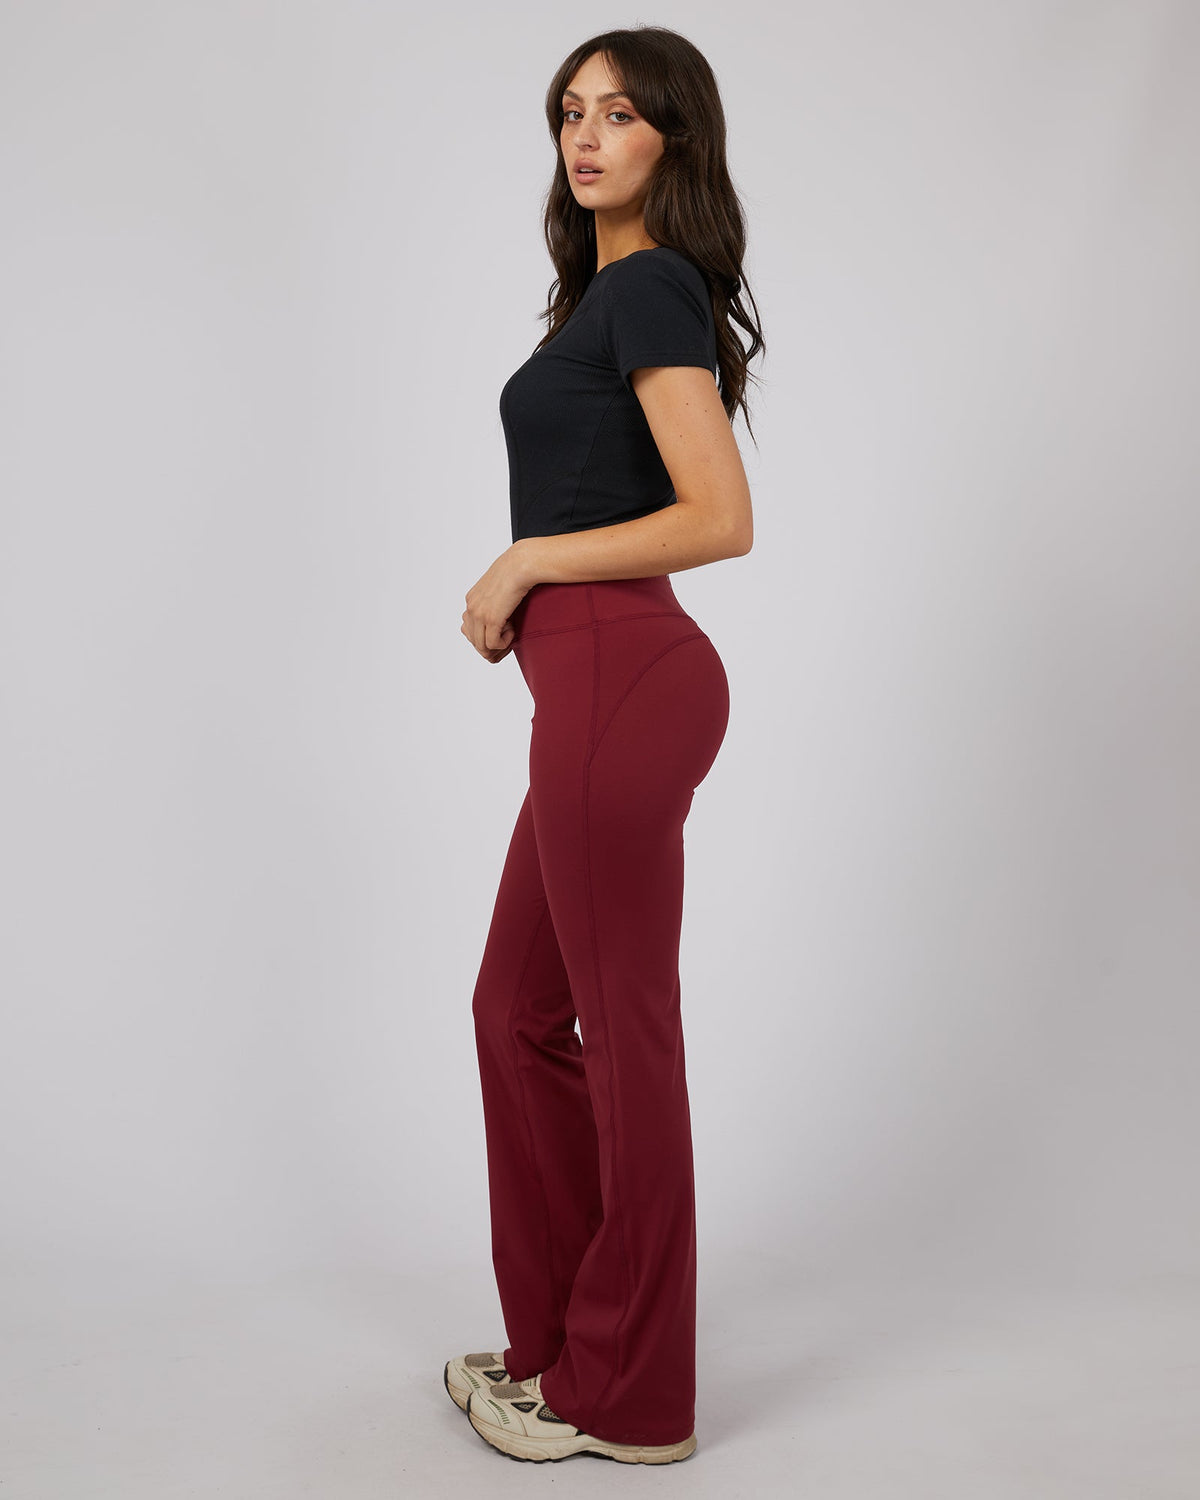 All About Eve-Active Flare Legging Port-Edge Clothing